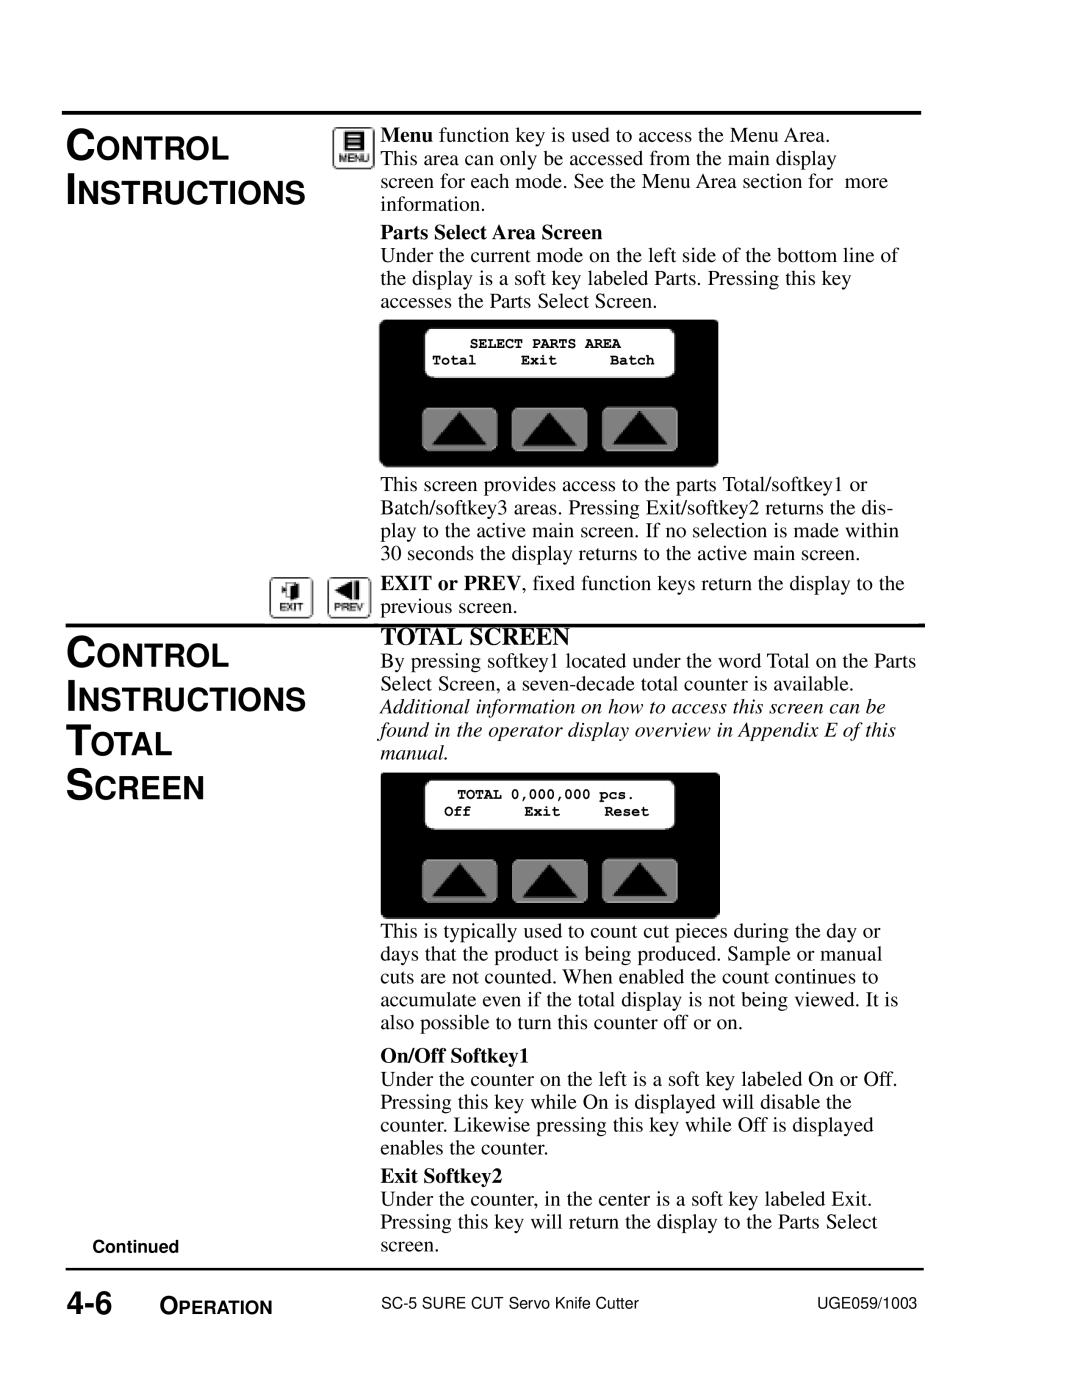 Conair SC-5 Parts TotalSelectSELECTAreaExitPARTSScreenAREABatch, Control Instructions Total Screen, On/Off Softkey1 